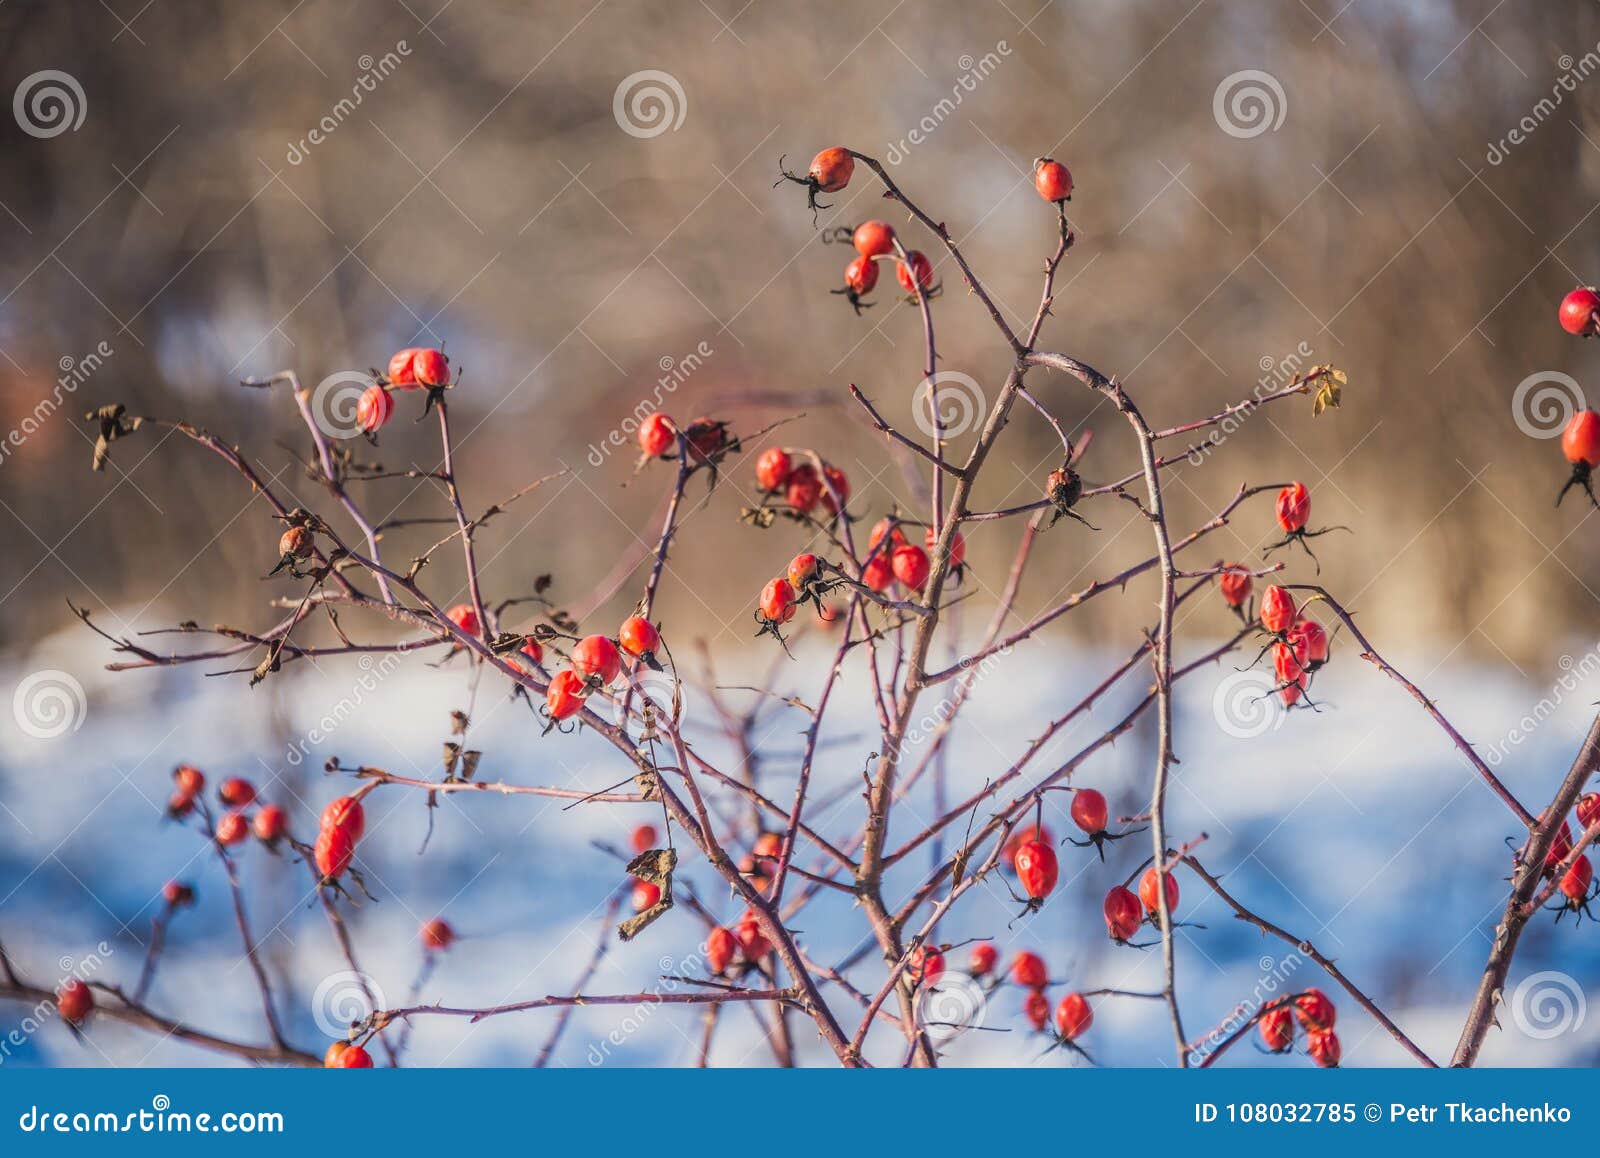 Branches of Wild Rose Hips with Red Berries Covered with Hoarfrost in ...